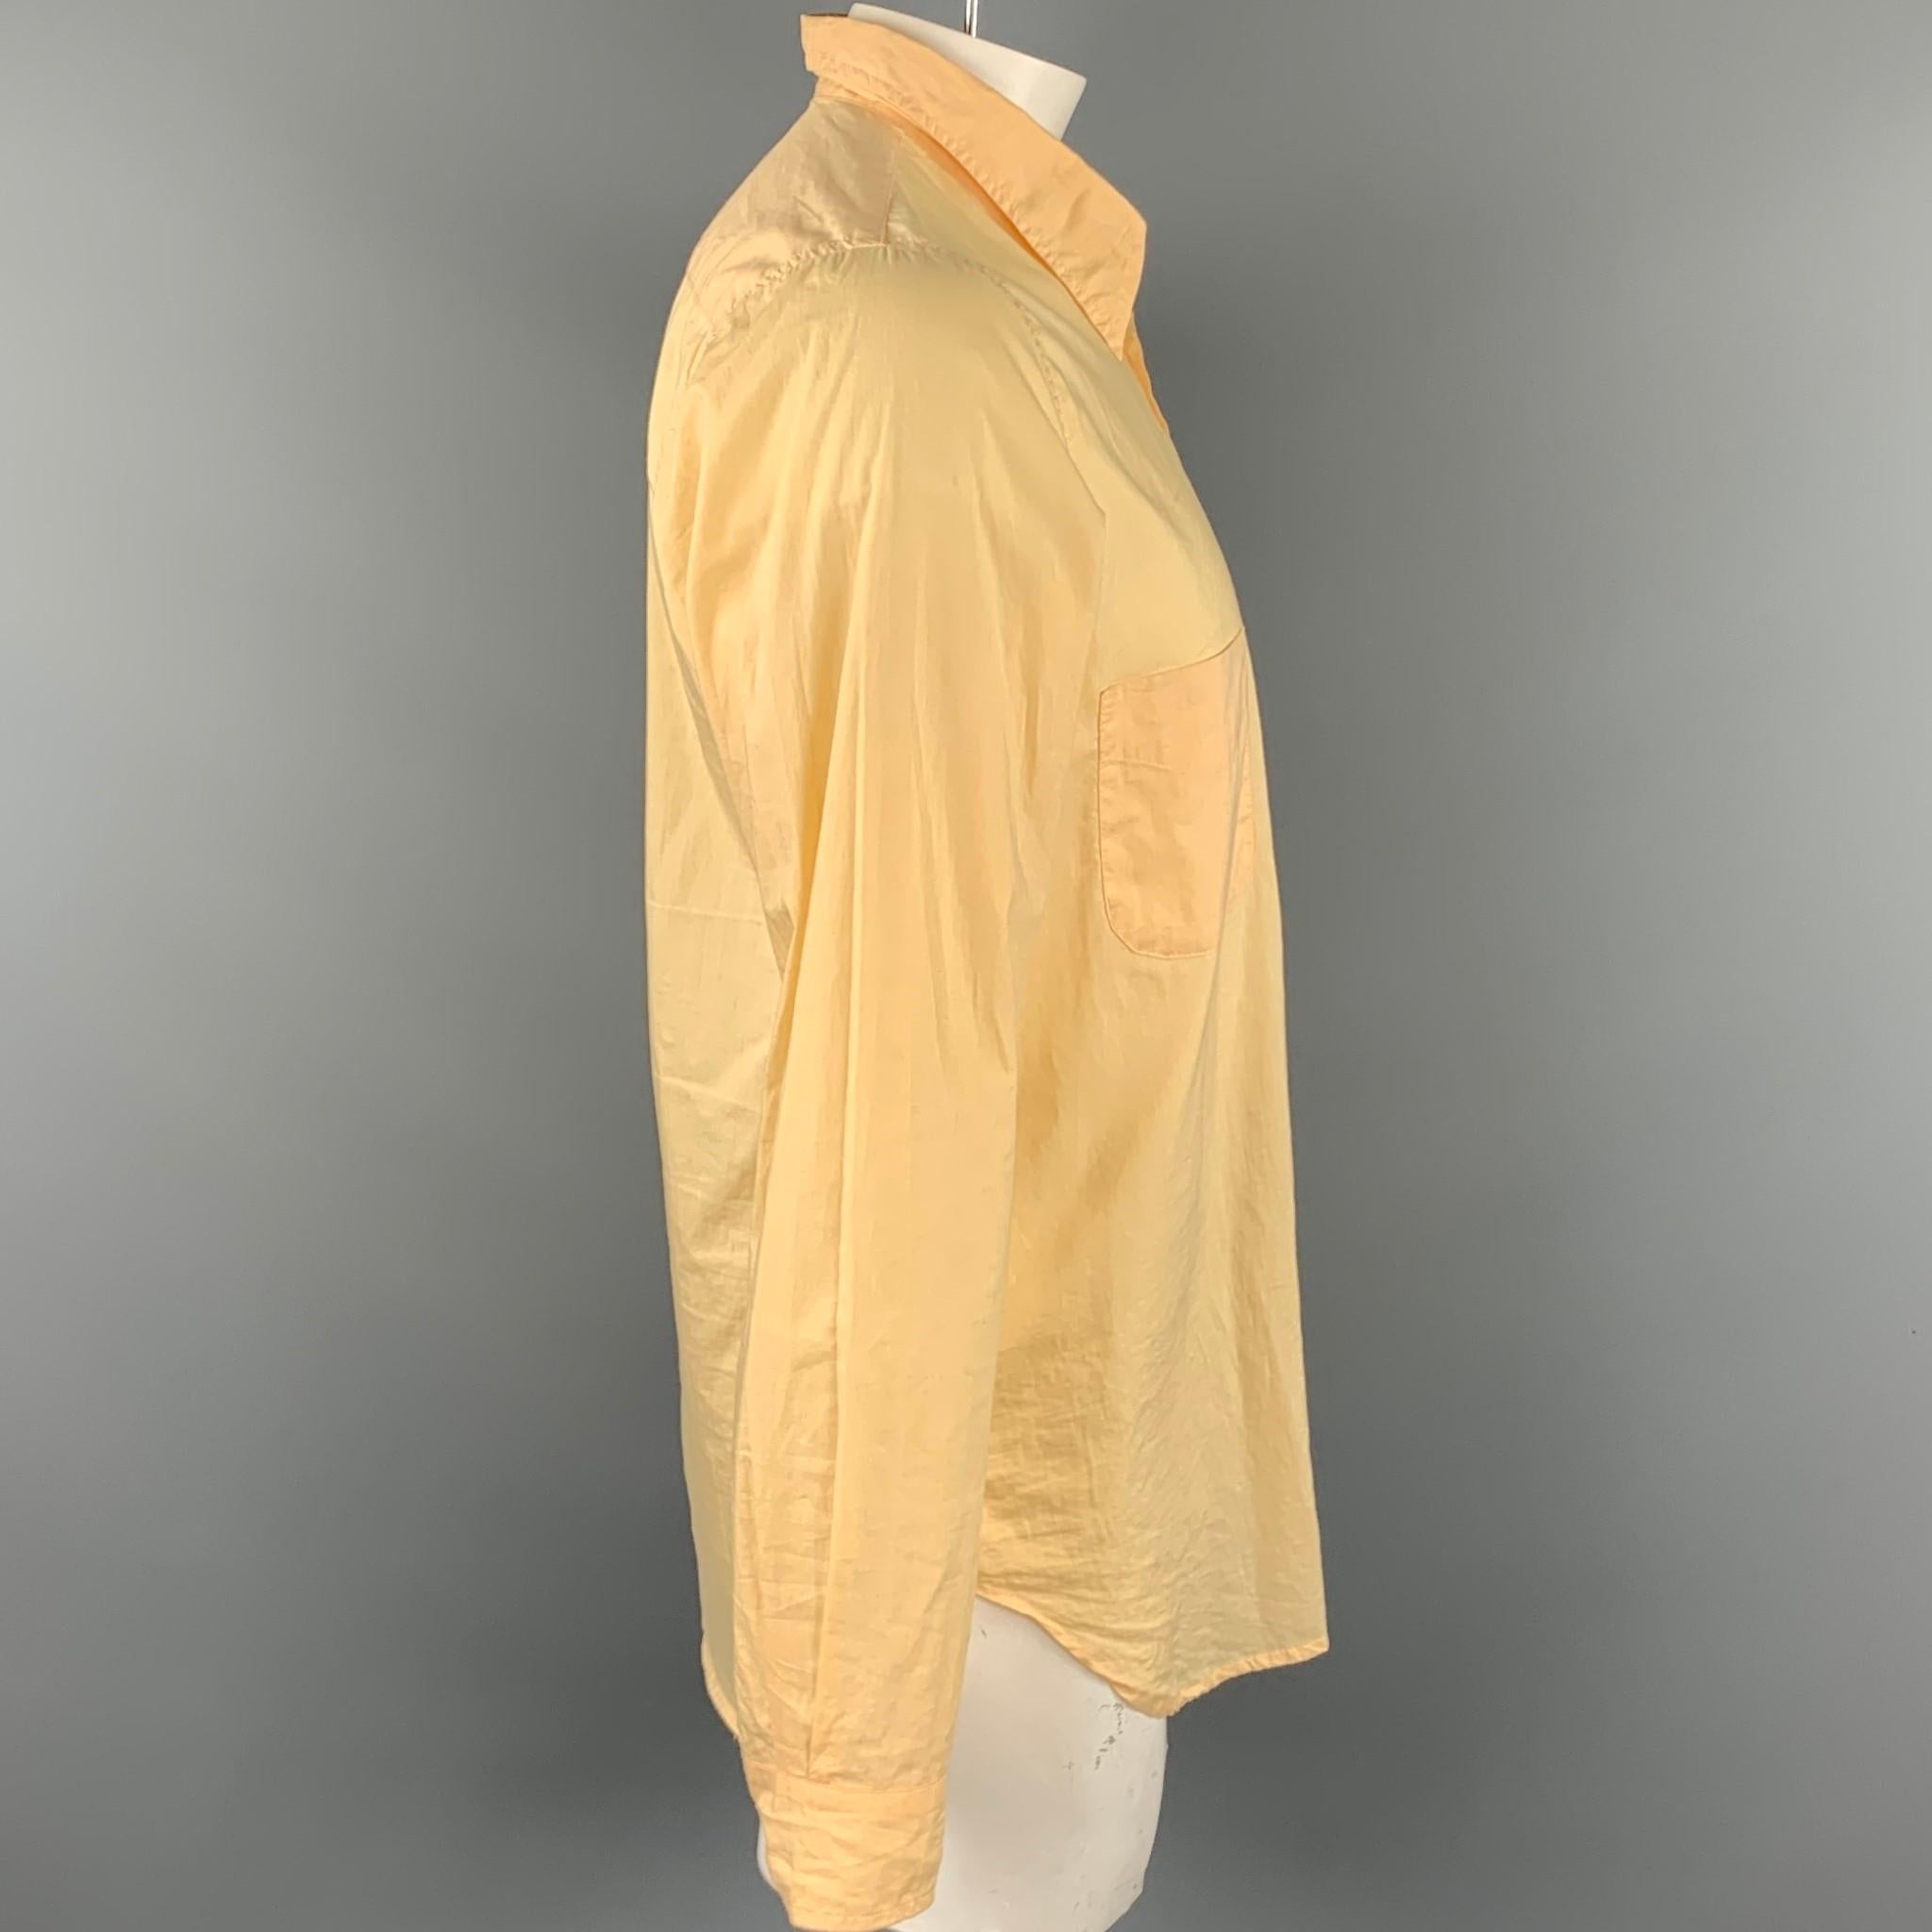 PAUL HARDEN long sleeve shirt comes in a yellow cotton featuring a button up style, patch pockets, and a spread collar. Handmade in Scotland.

Good Pre-Owned Condition.
Marked: XL

Measurements:

Shoulder: 16.5 in.
Chest: 44 in.
Sleeve: 28